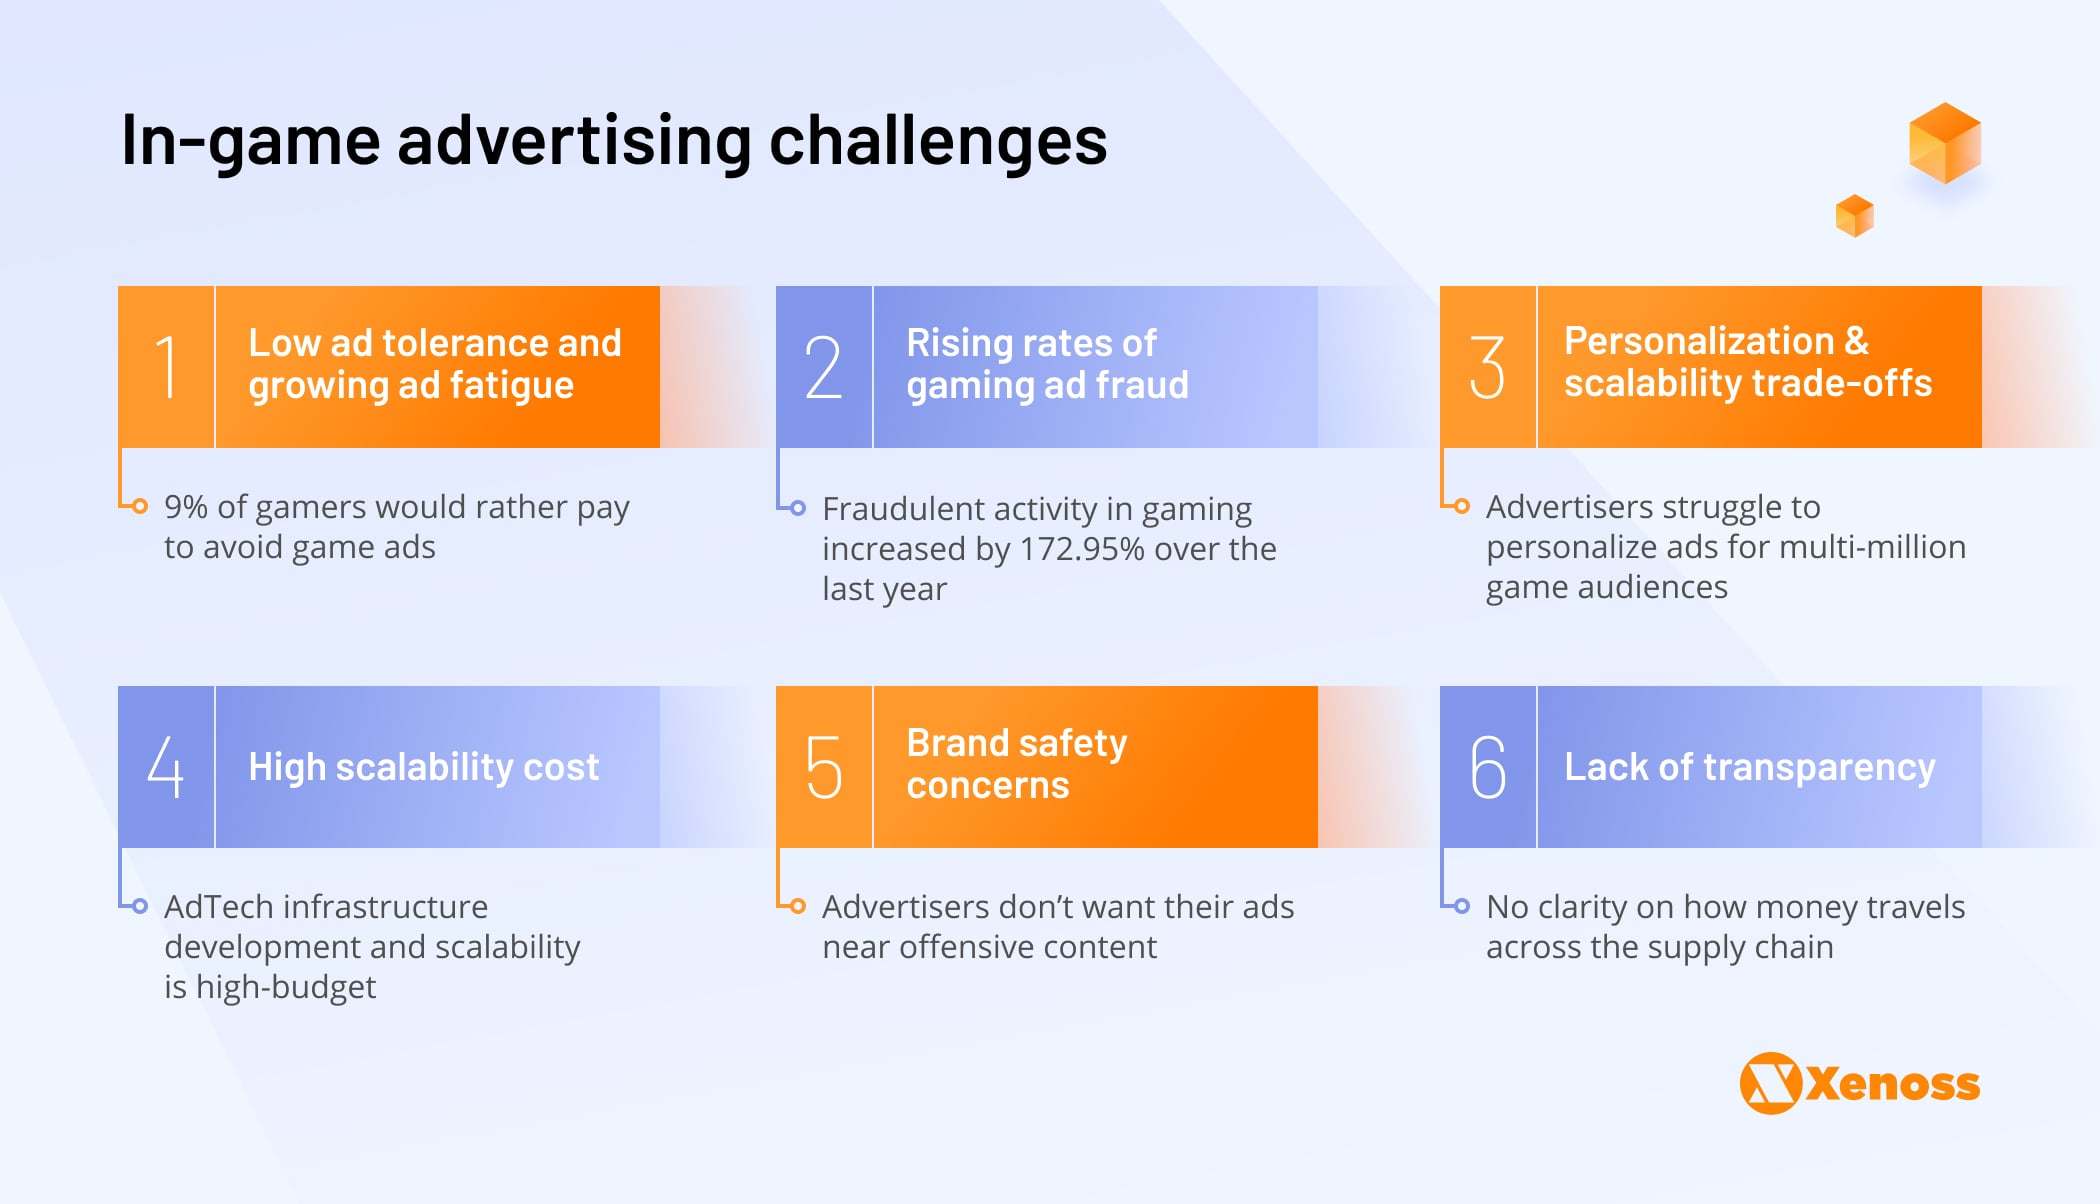 In-game advertising challenges